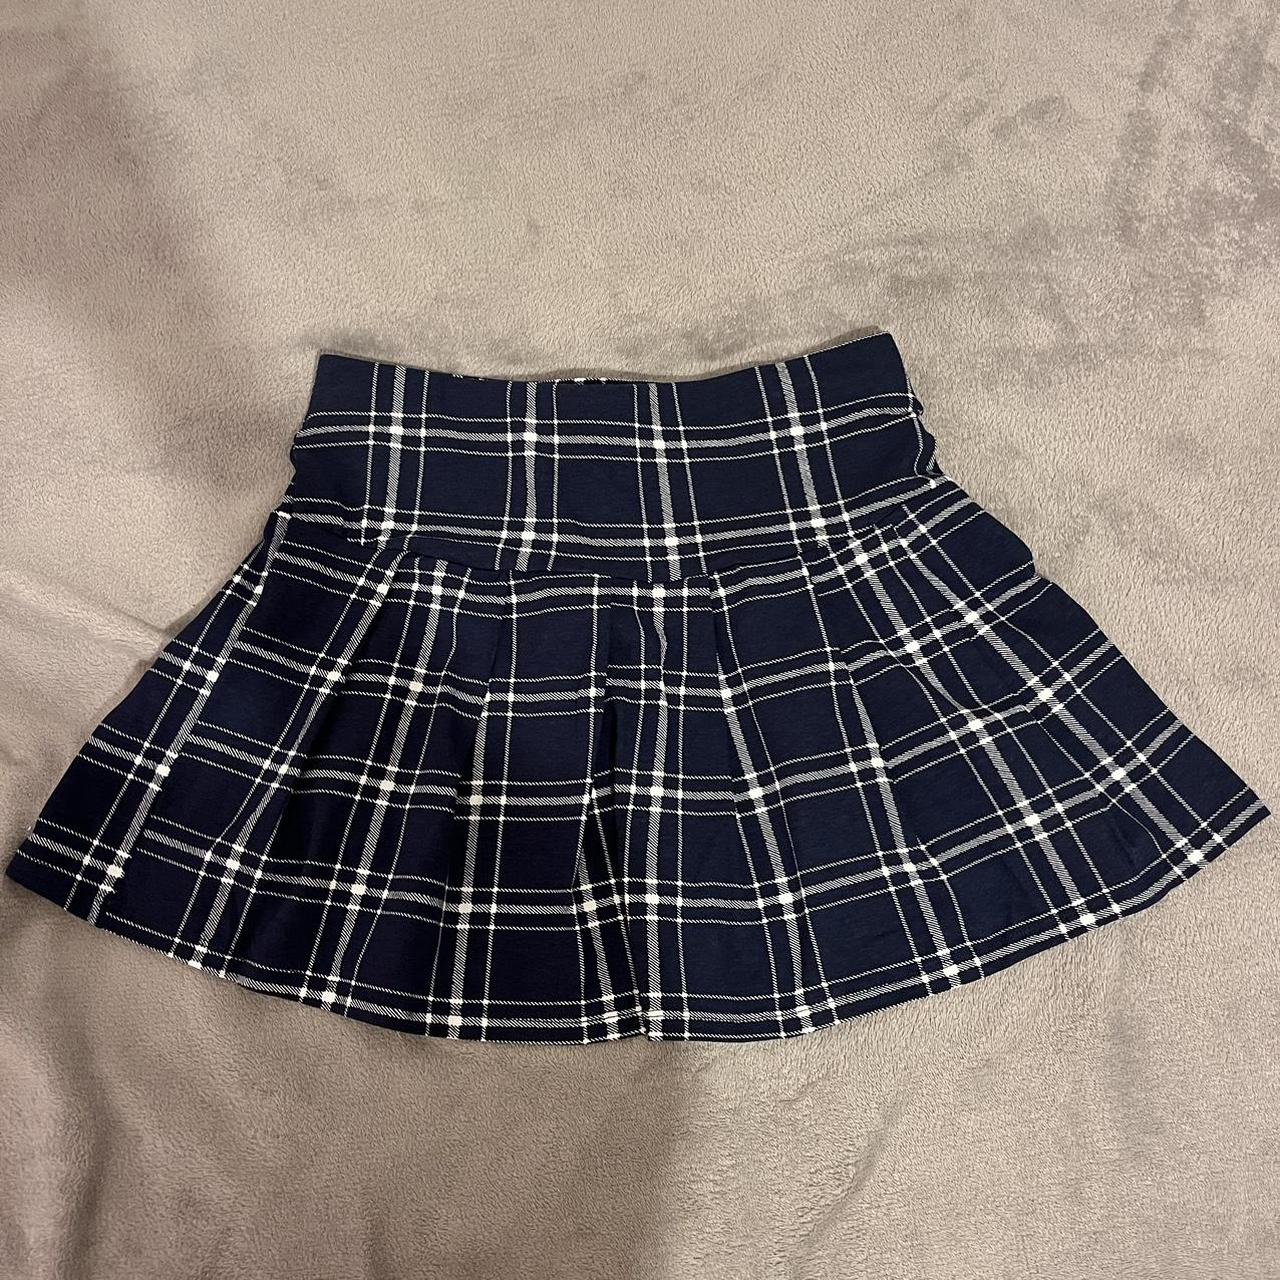 Navy blue tennis skirt, only worn for the picture.... - Depop